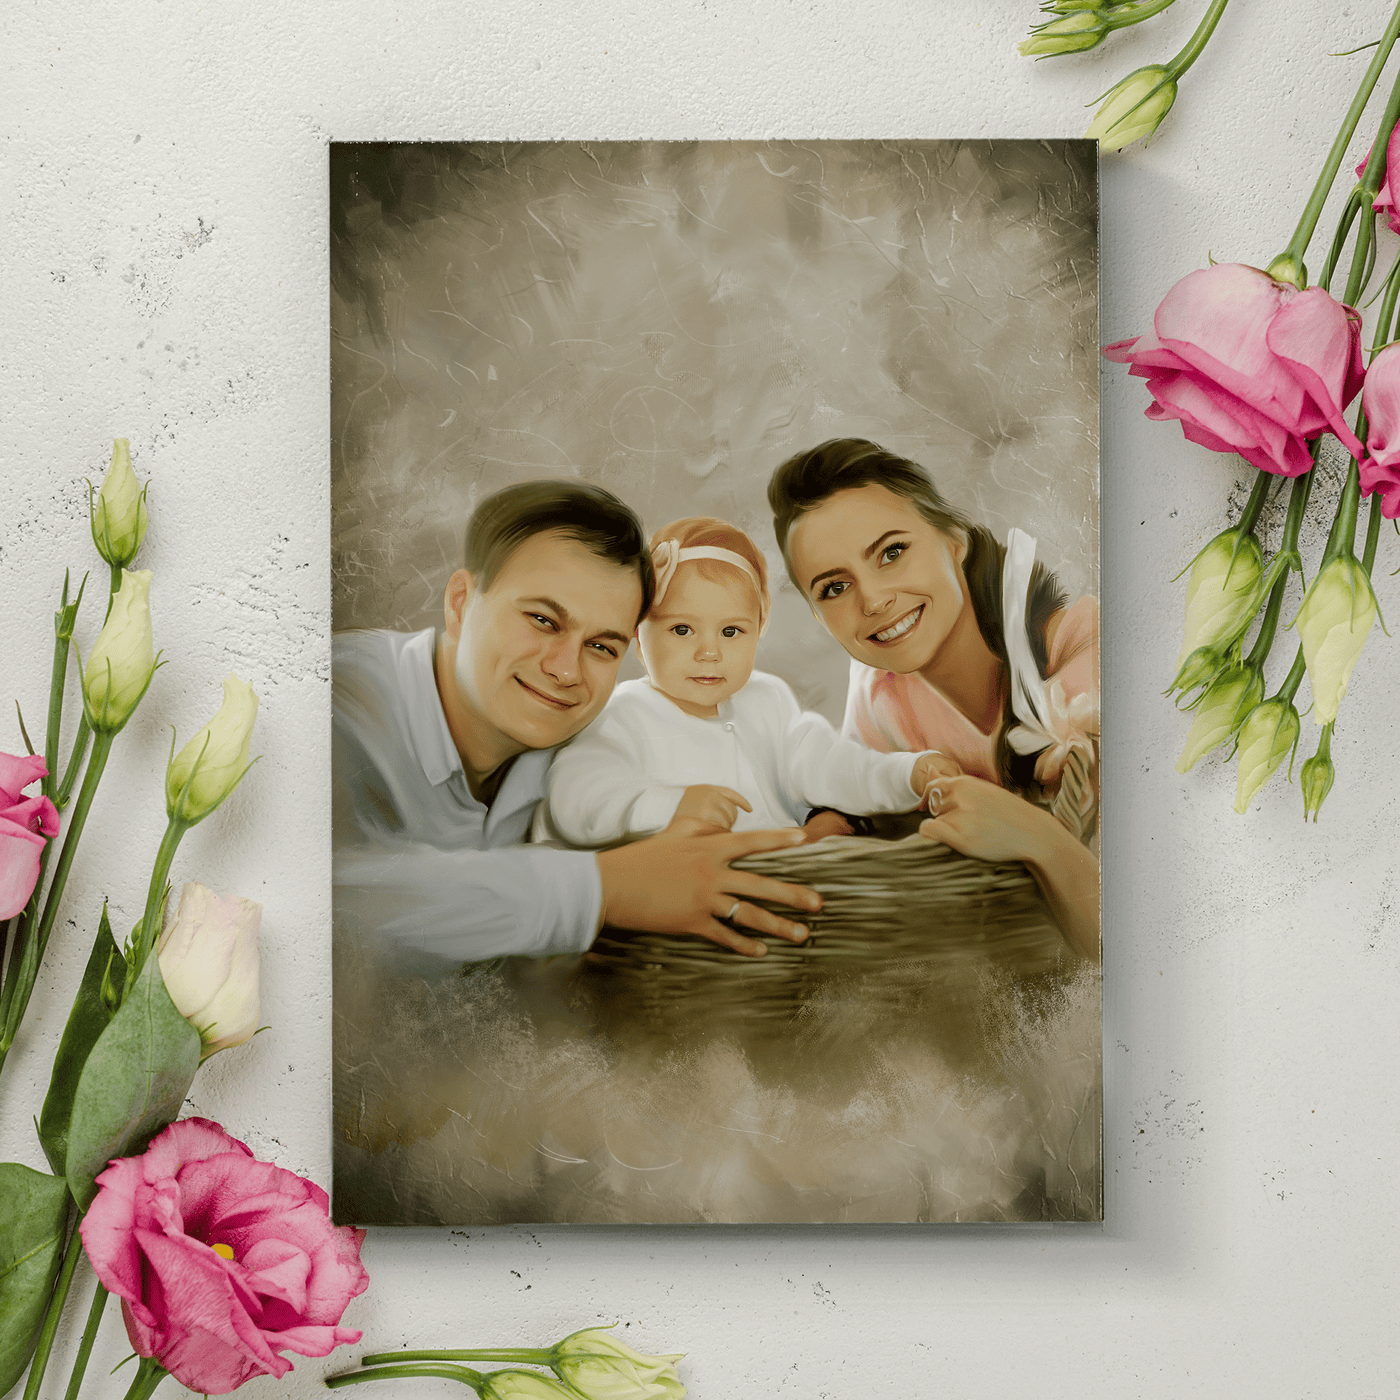 parents digital art of a lovely family